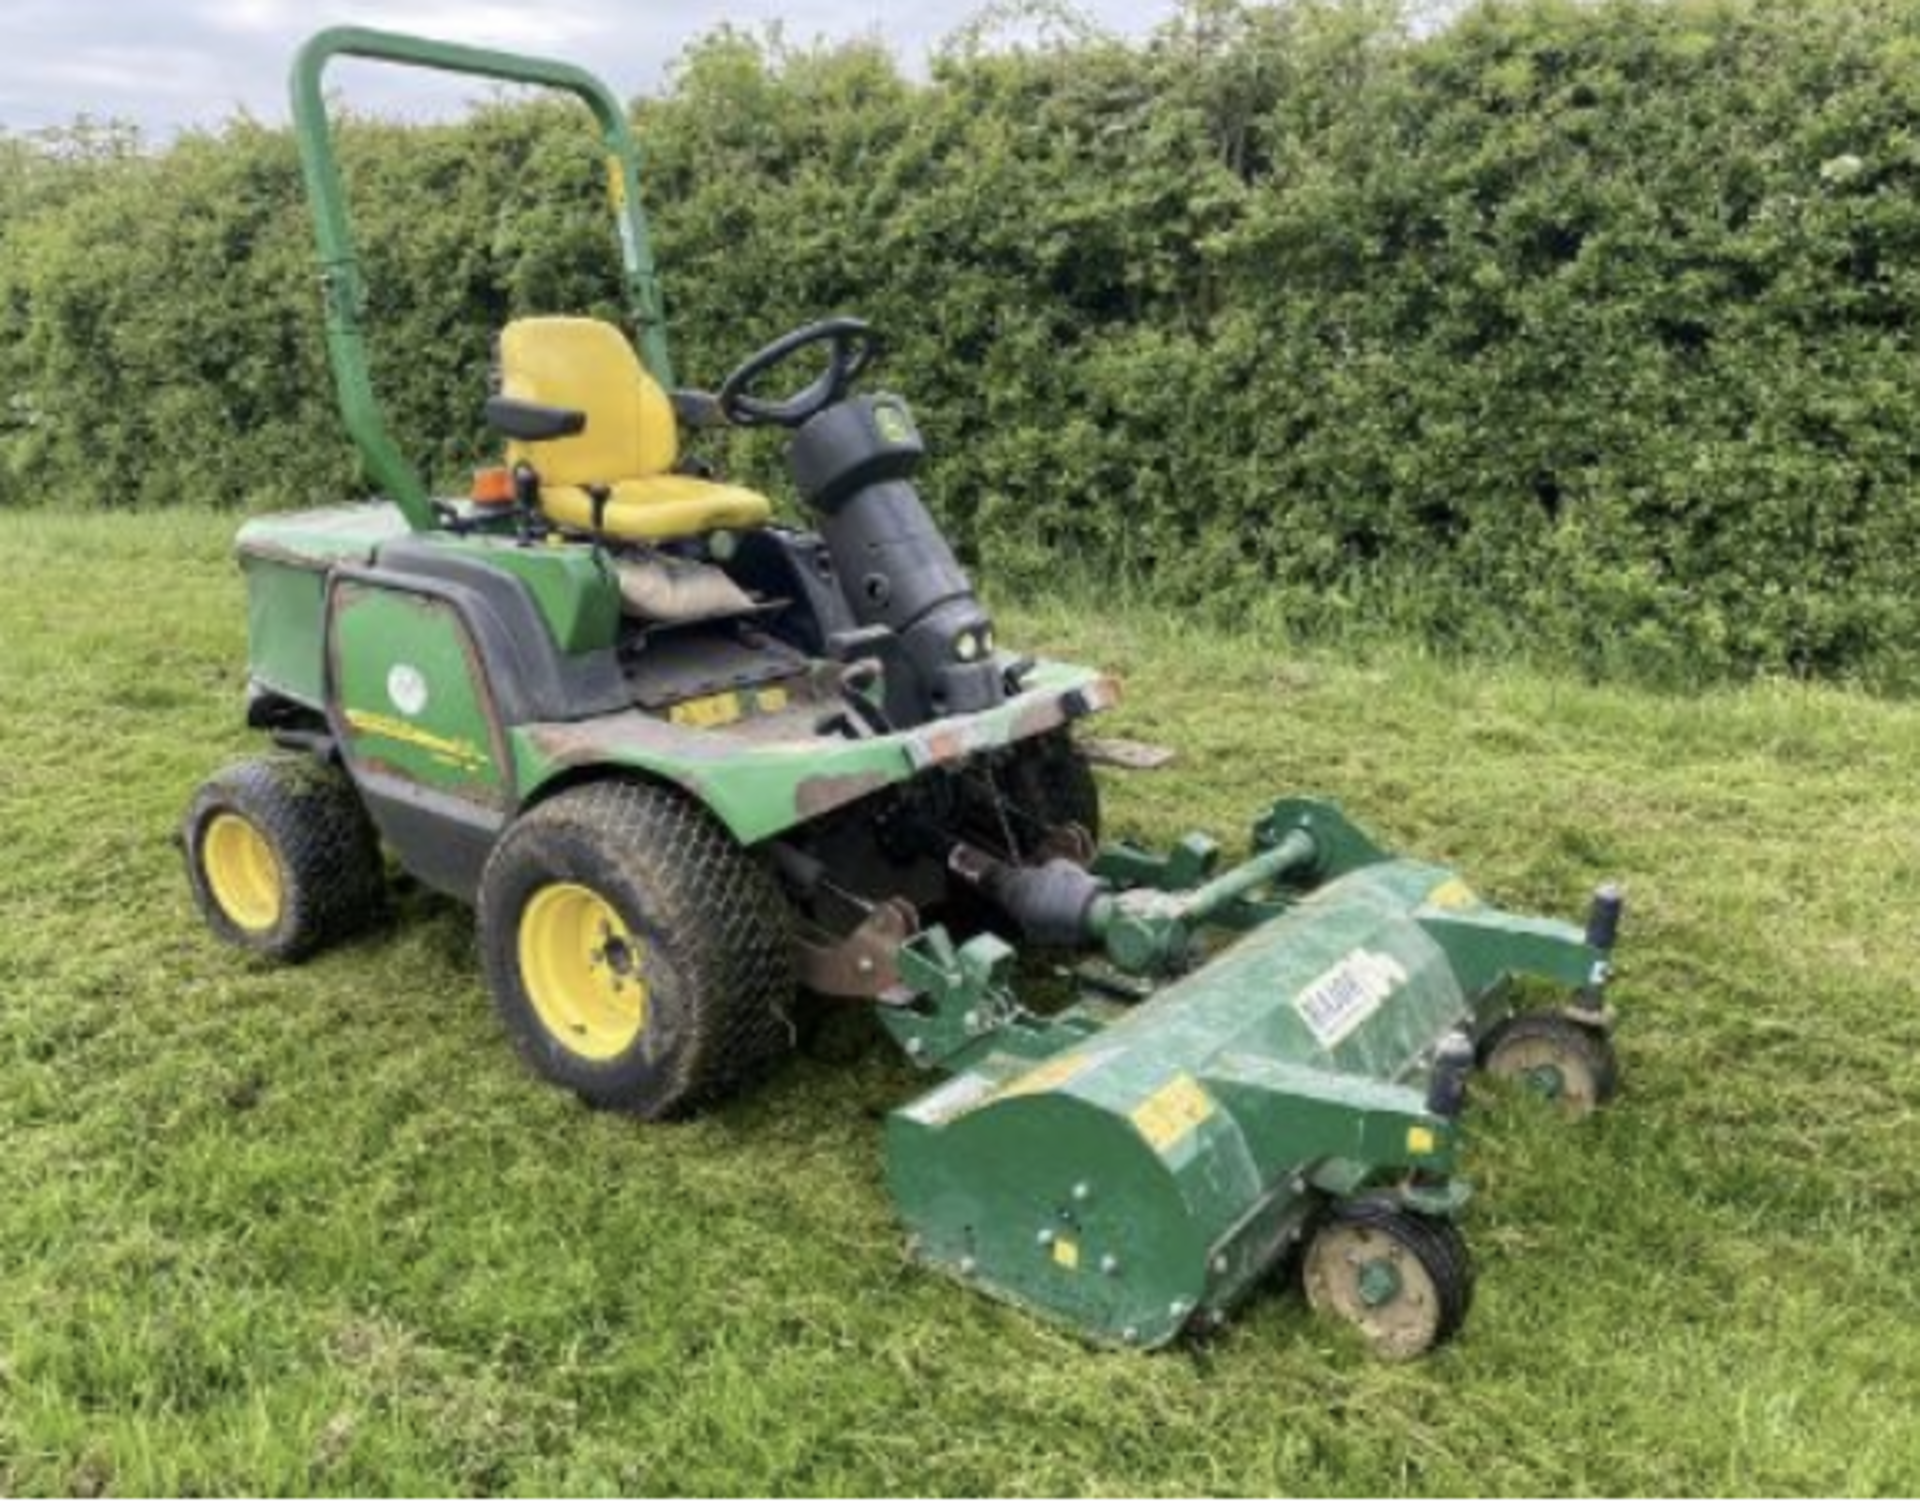 JOHN DEERE 1545 FRONT FLAIL MOWER.YEAR 2012. 1 OWNER FROM NEW. HOURS 2900. LOCATION NORTH YORKSHIRE. - Image 6 of 6